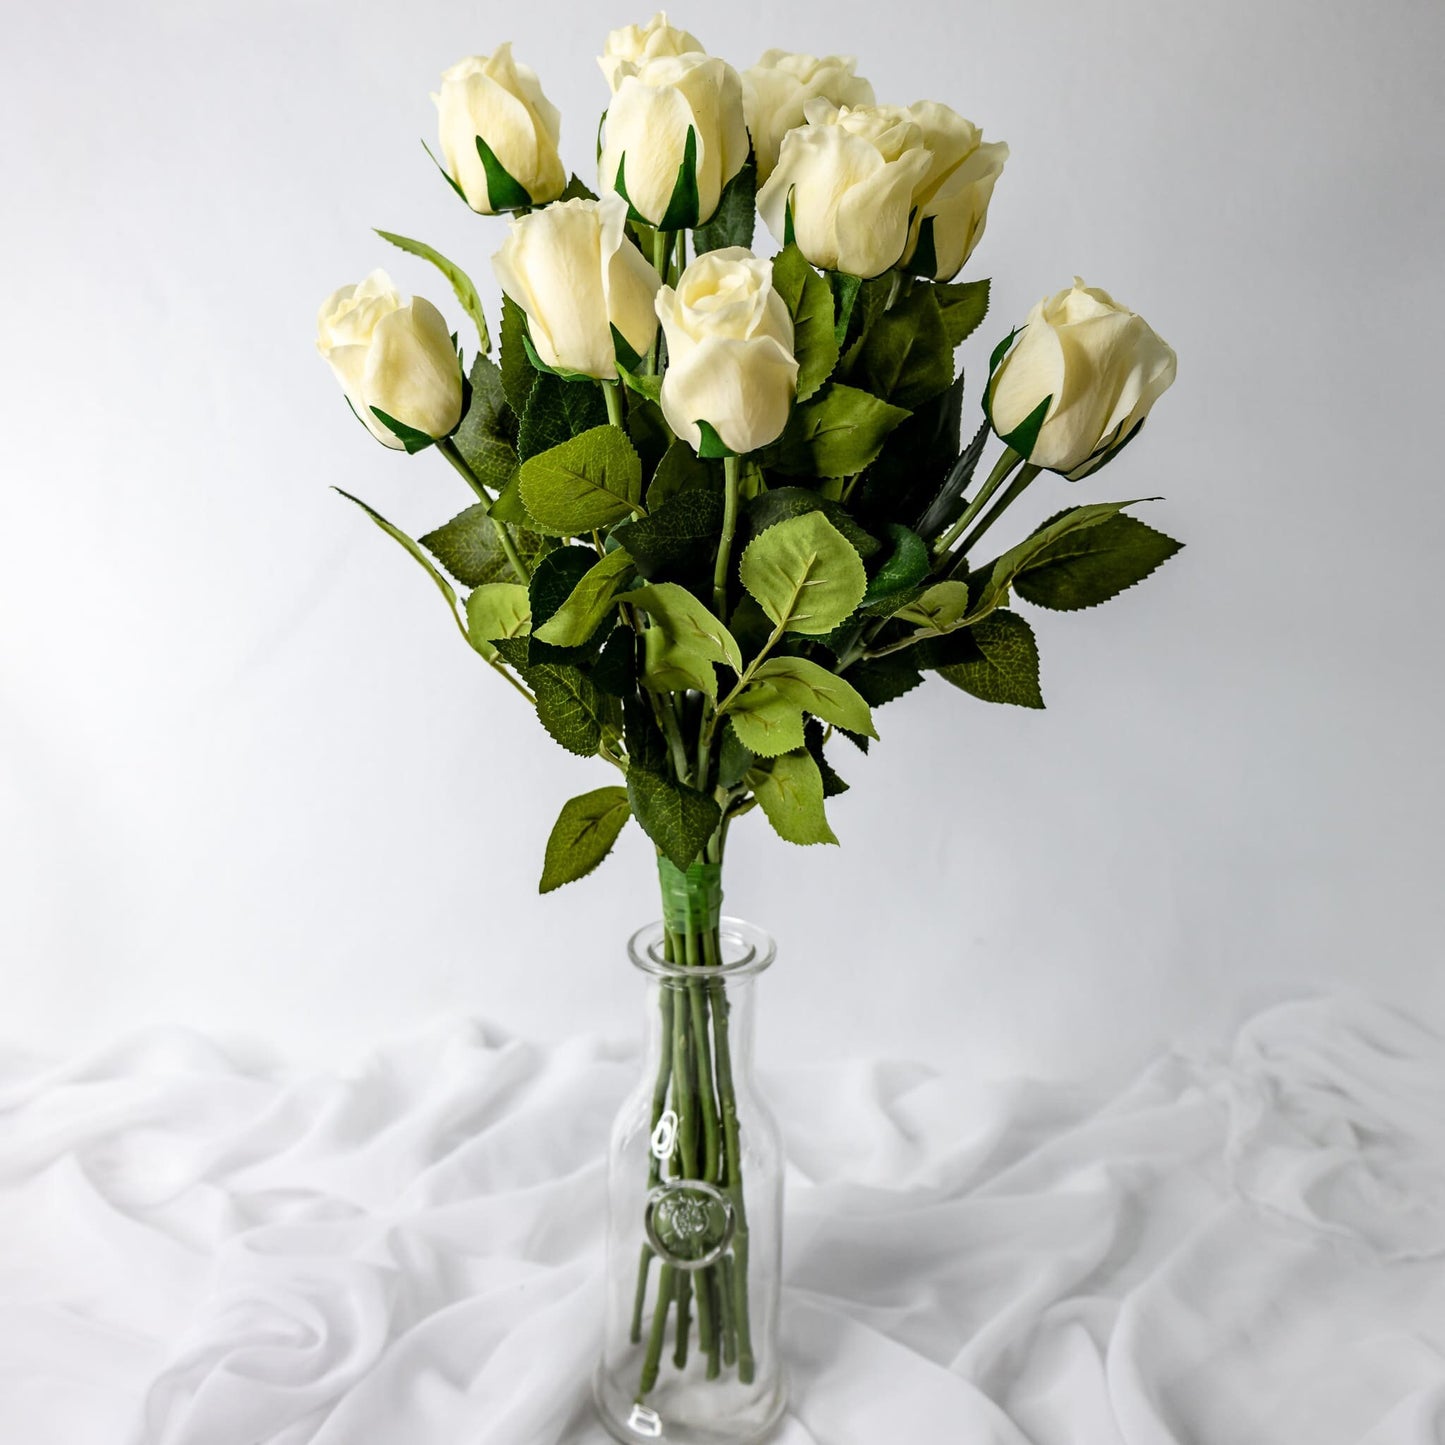 Artificial Cream Real Touch Rose Open Bud in glass vase